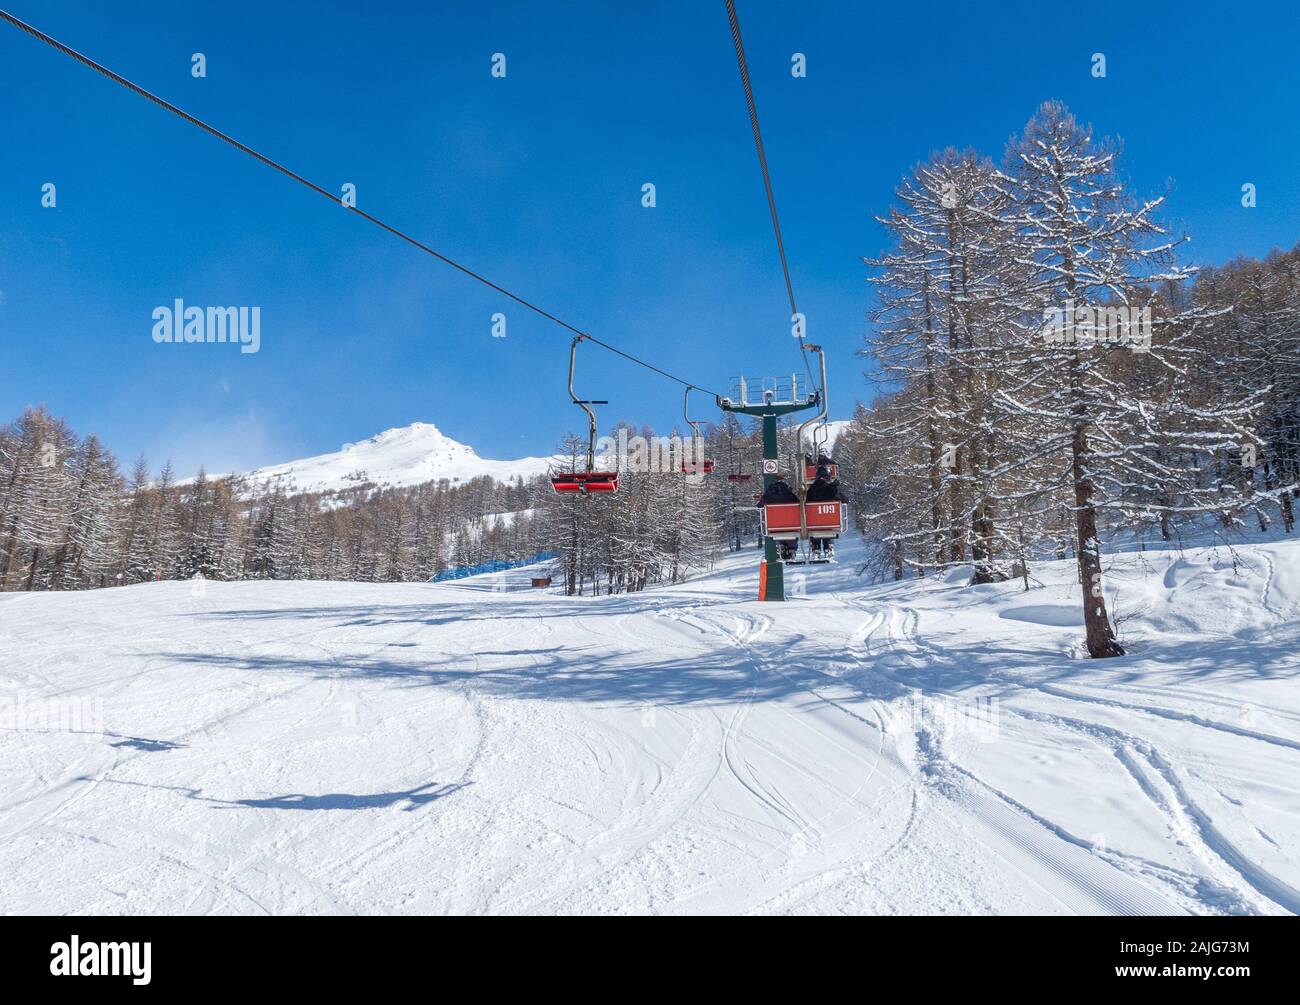 Bardonecchia, Italian Alps, snowy scenery: ski slopes and chairlift (chair lift) with skiers, ski resort and winter snow landscape Stock Photo